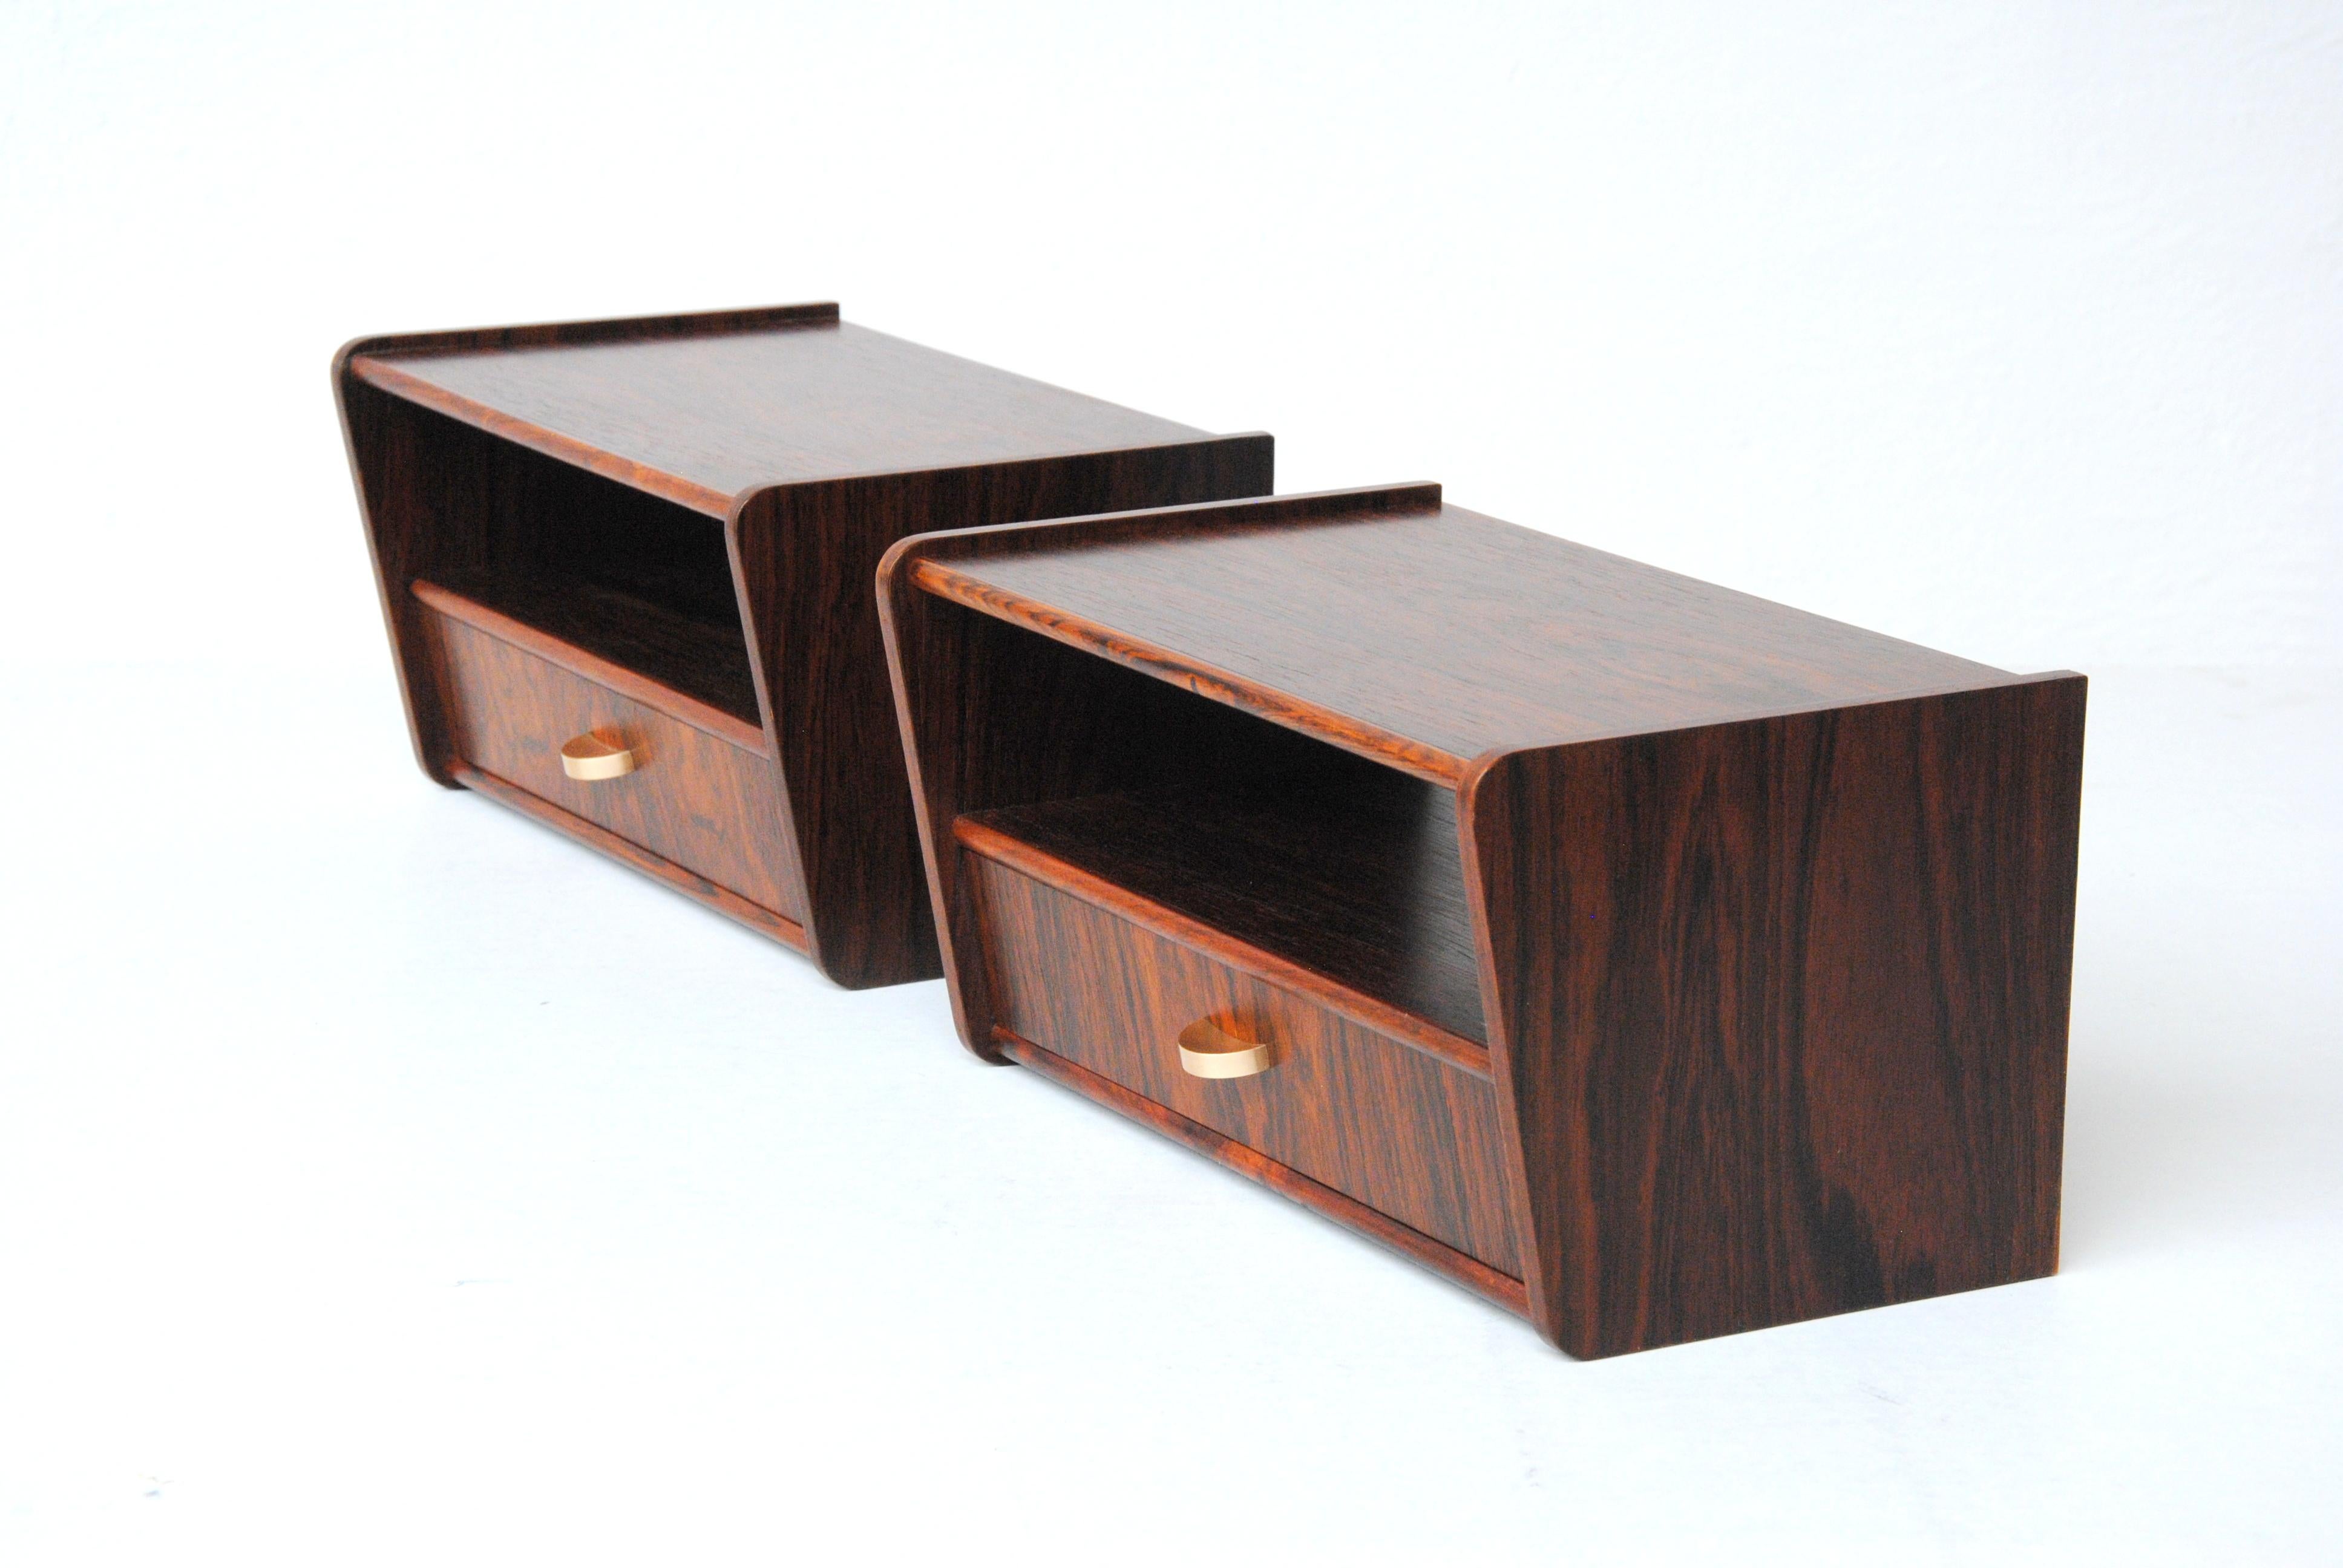 Set of two restored Danish floating rosewood nightstands from the 1950´s - 1960´s

The nightstands are examples of the minimalistic and functional yet beautiful design and advanced craftmanship that characterized Danish mid-Century Furniture.